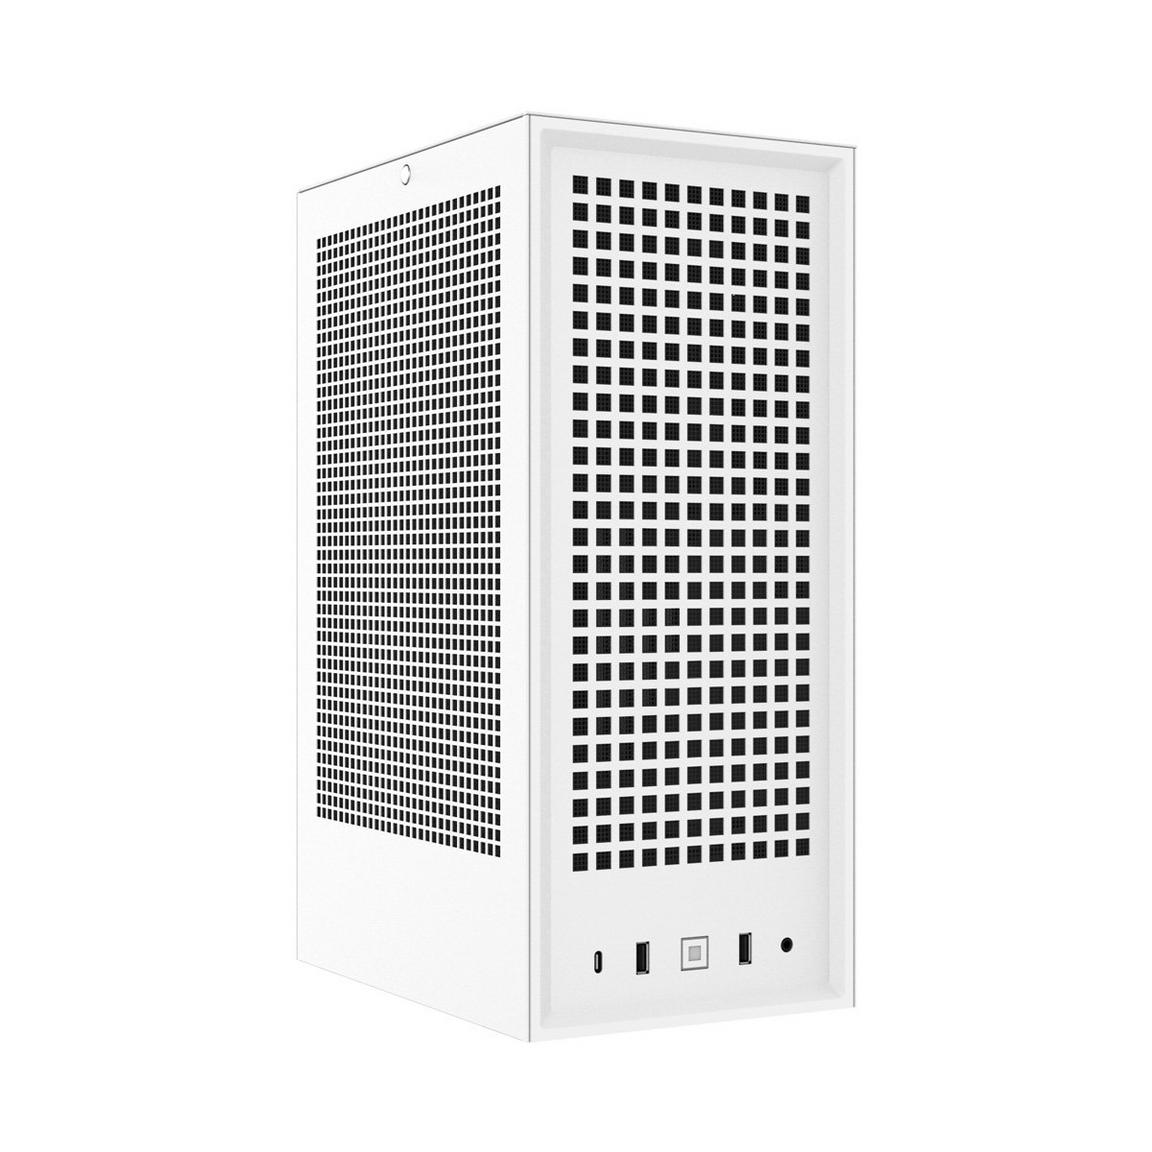 HYTE Revolt 3 Small Form Factor Premium ITX Computer Gaming Case, White